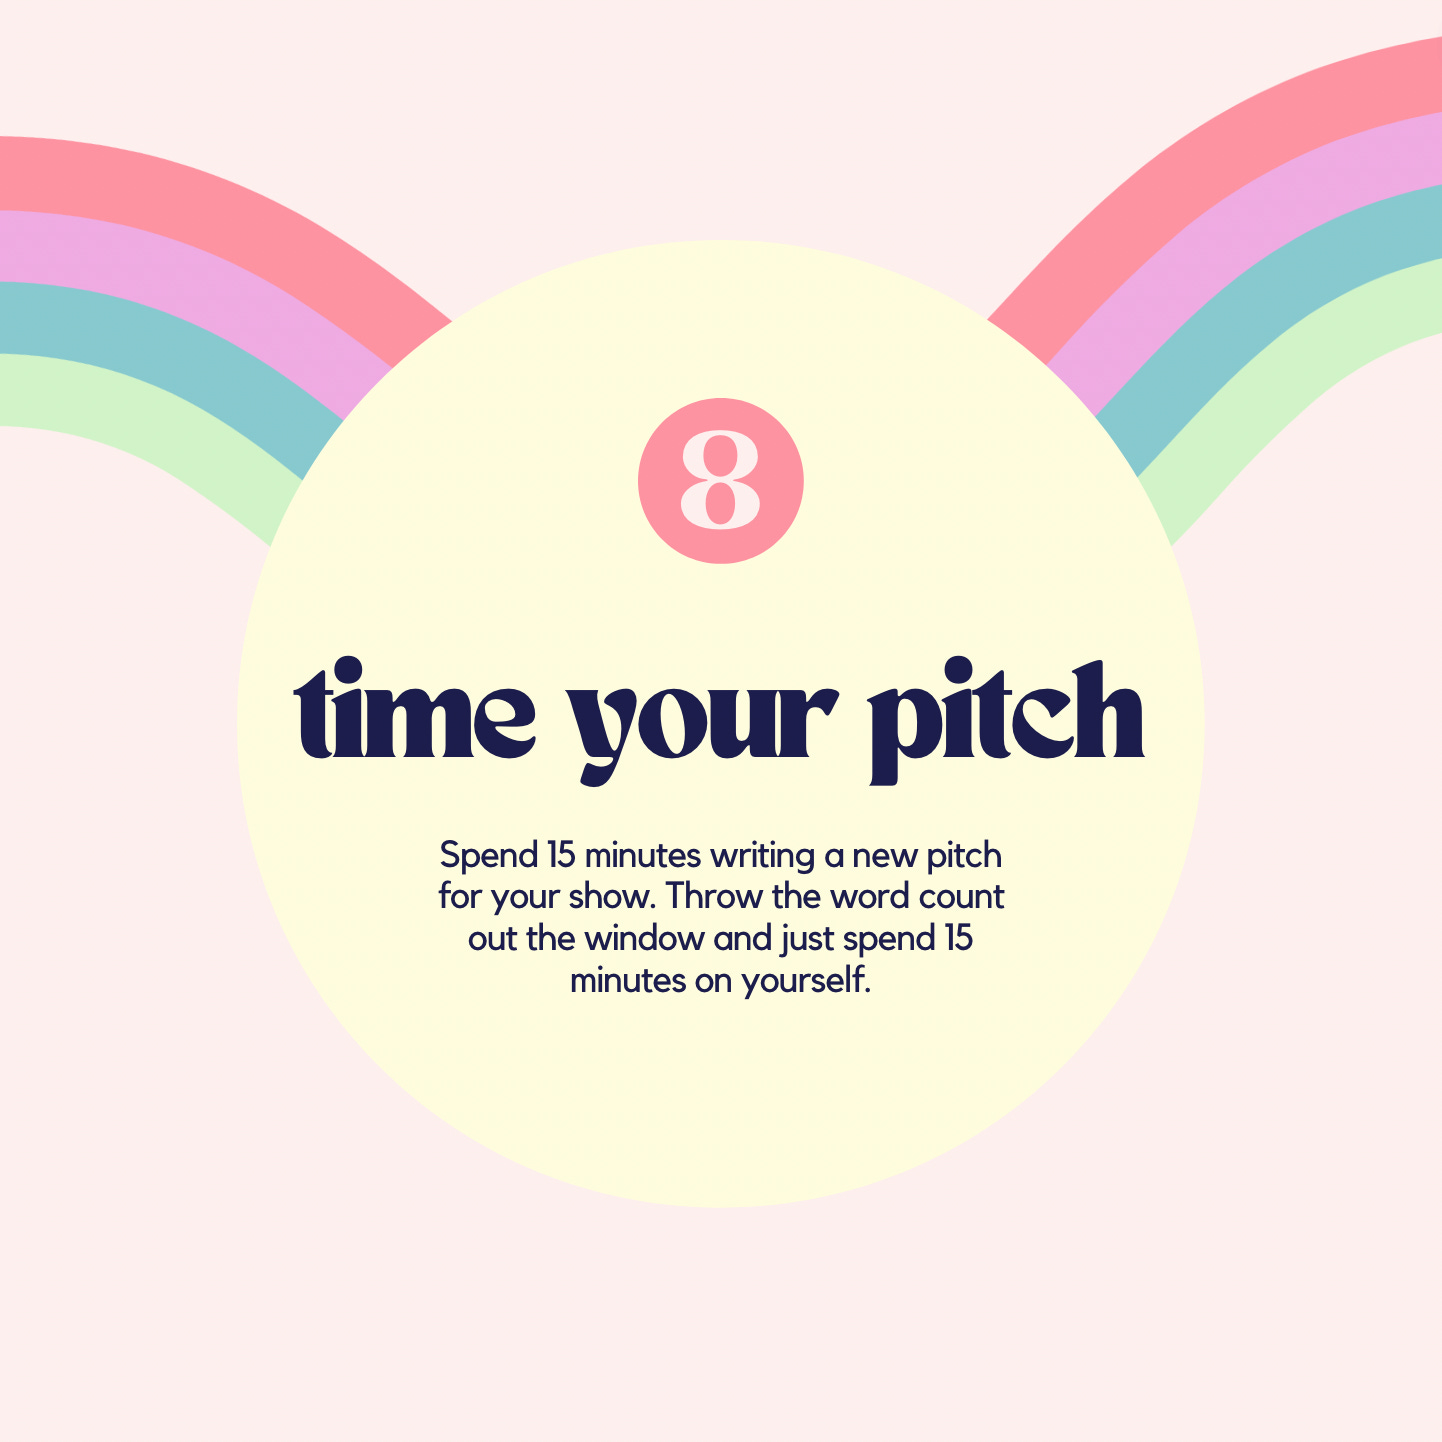 #8. Time your pitch.